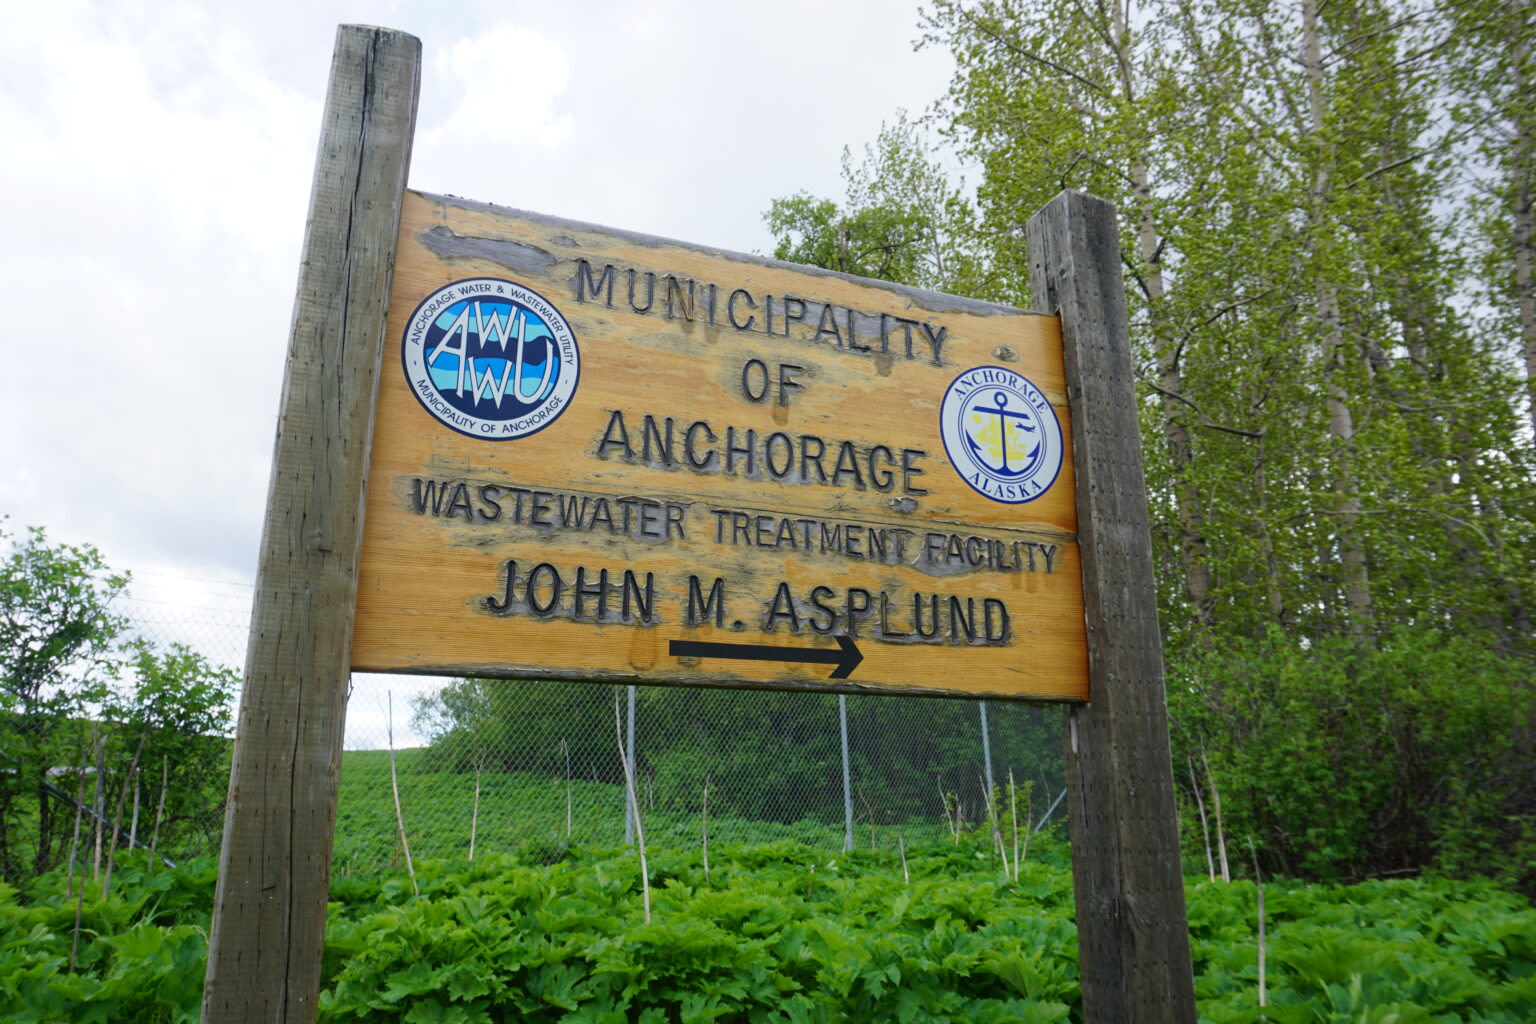 Alaska health officials point to wastewater sampling as useful disease-tracking tool